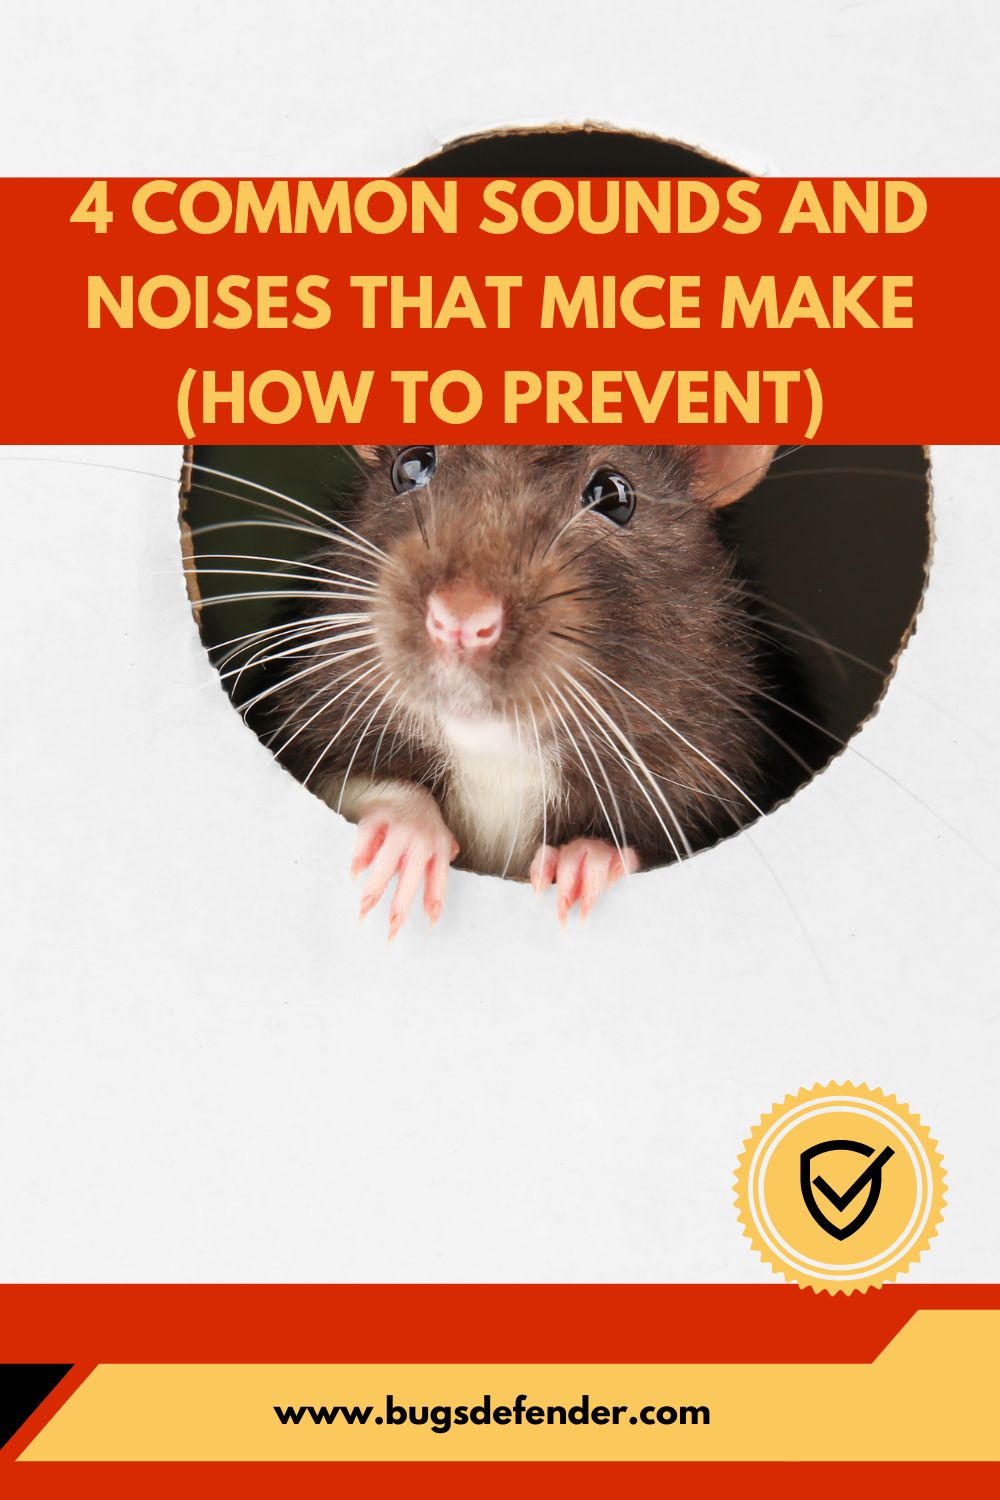 4 Common Sounds and Noises That Mice Make (How to prevent) pin 1